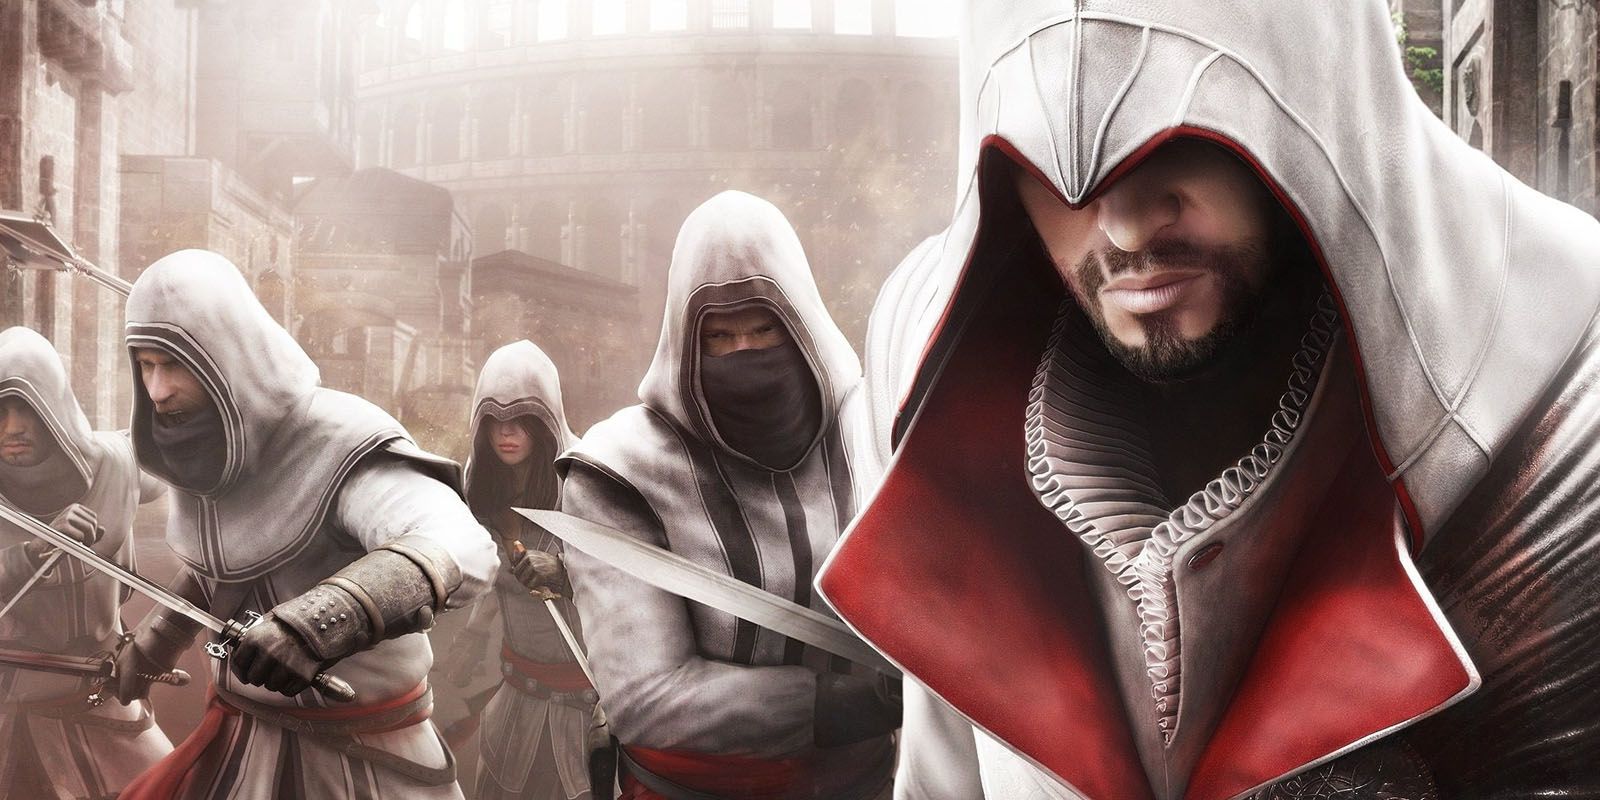 Ezio from Assassins' Creed Brotherhood with a group of Assassins behind him.